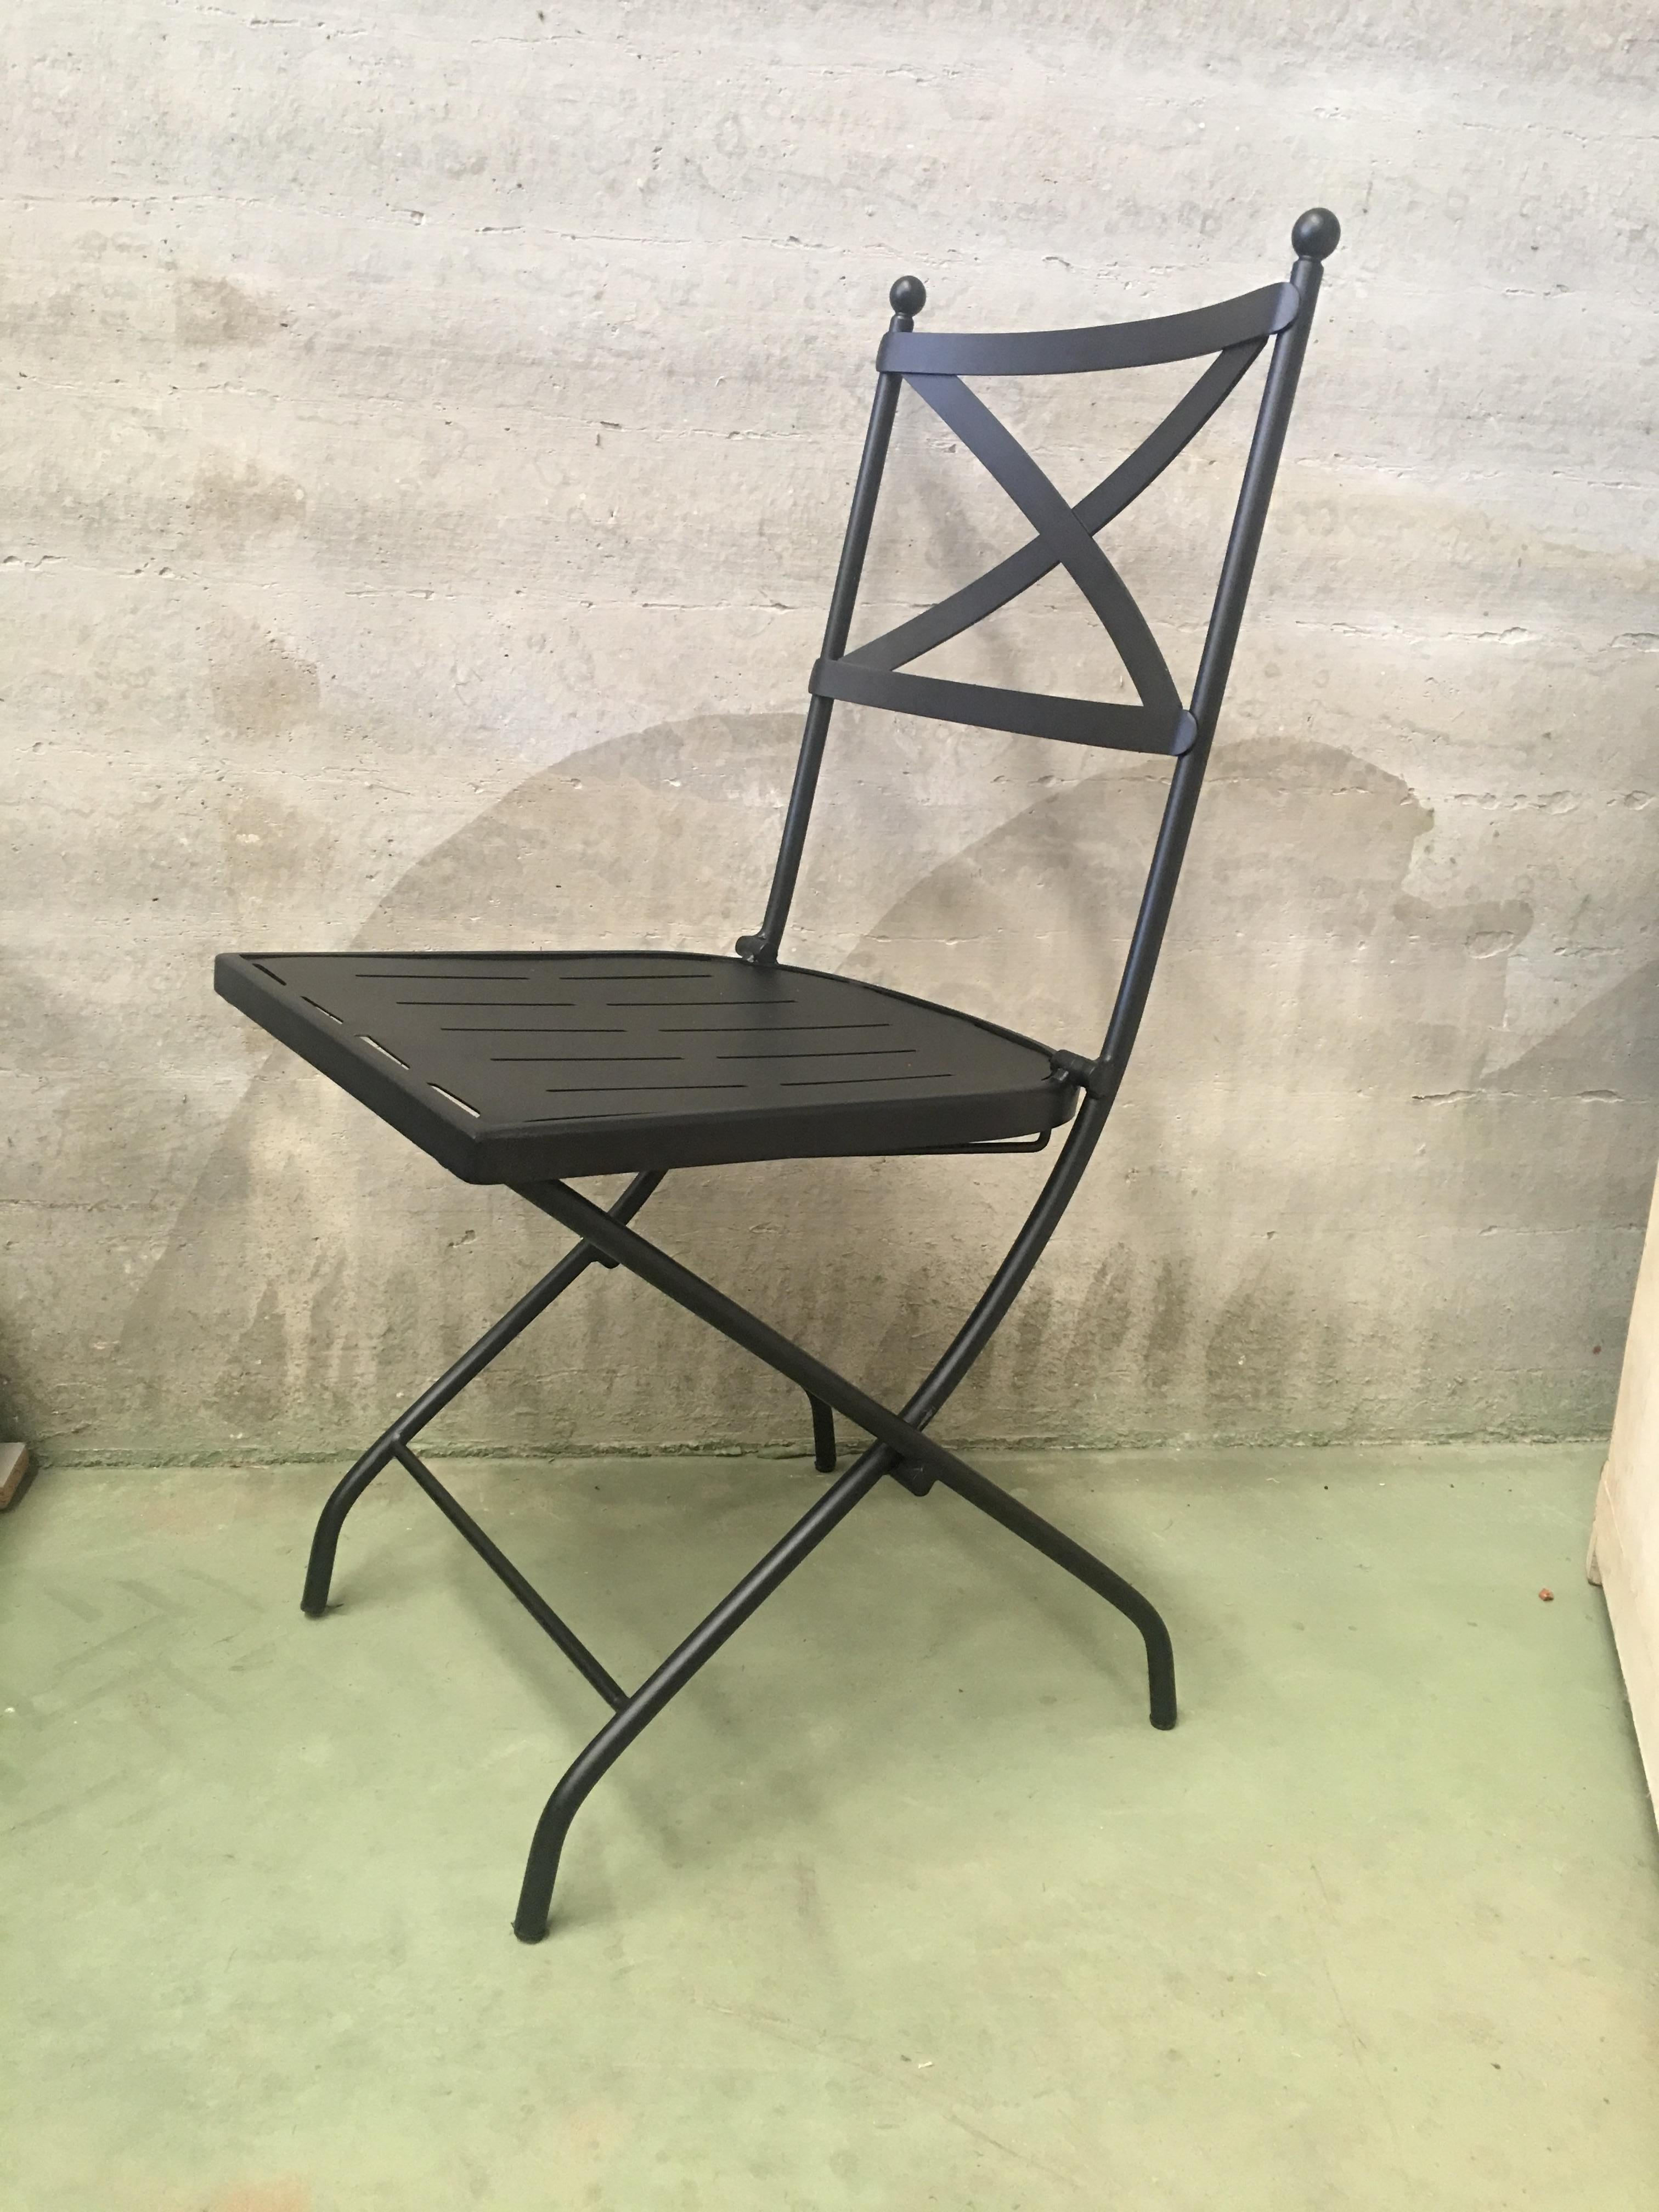 French Vintage Style Bistro Folding Iron Chair, Indoor & Outdoor In Excellent Condition For Sale In Miami, FL